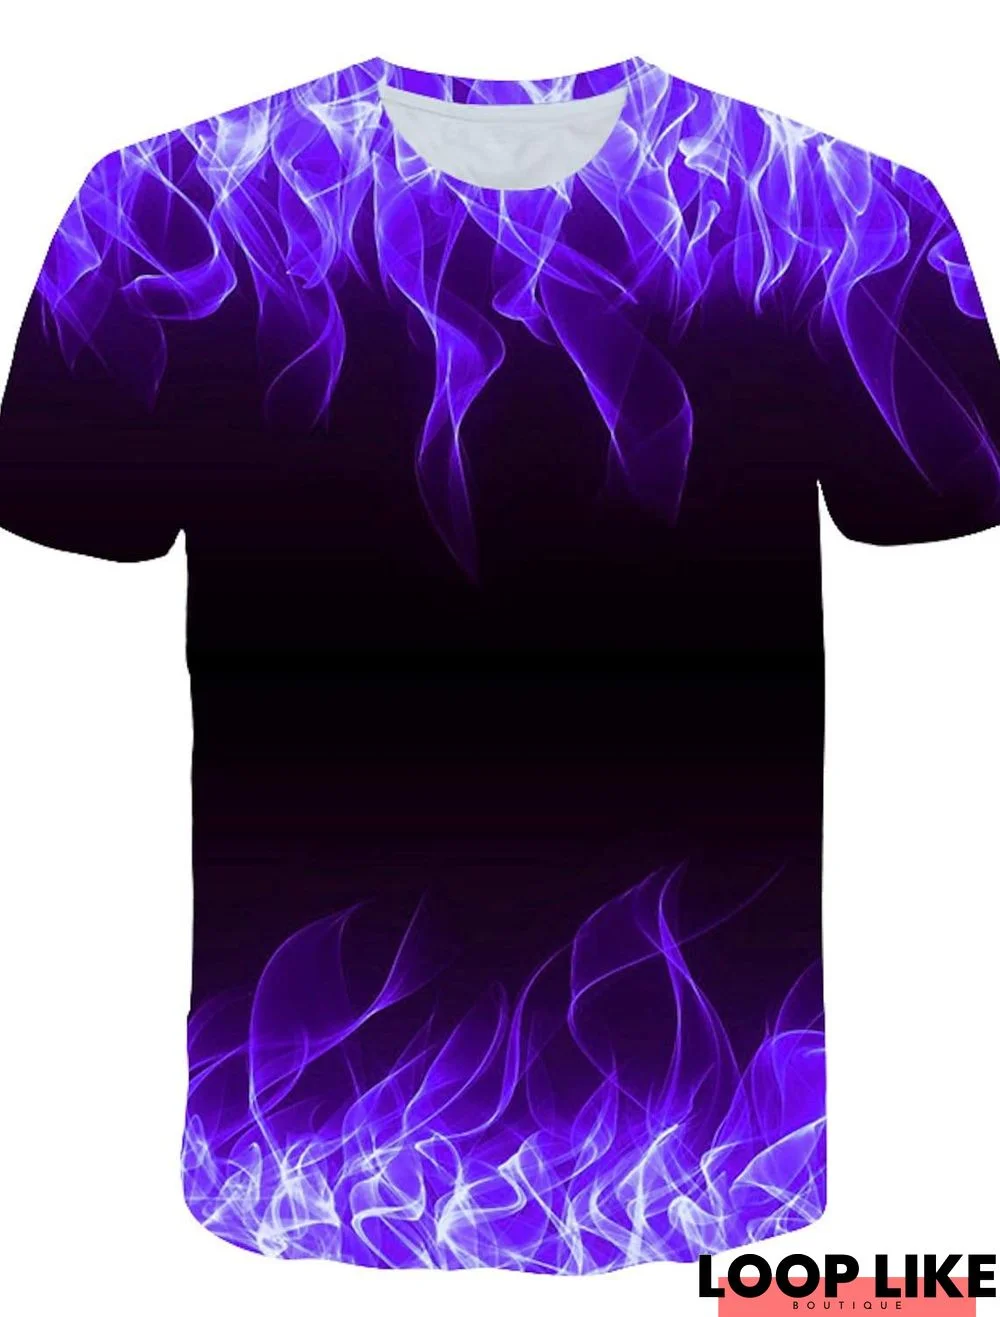 Men's T Shirt Graphic Flame Print Short Sleeve Casual Tops Basic Designer Big and Tall Round Neck